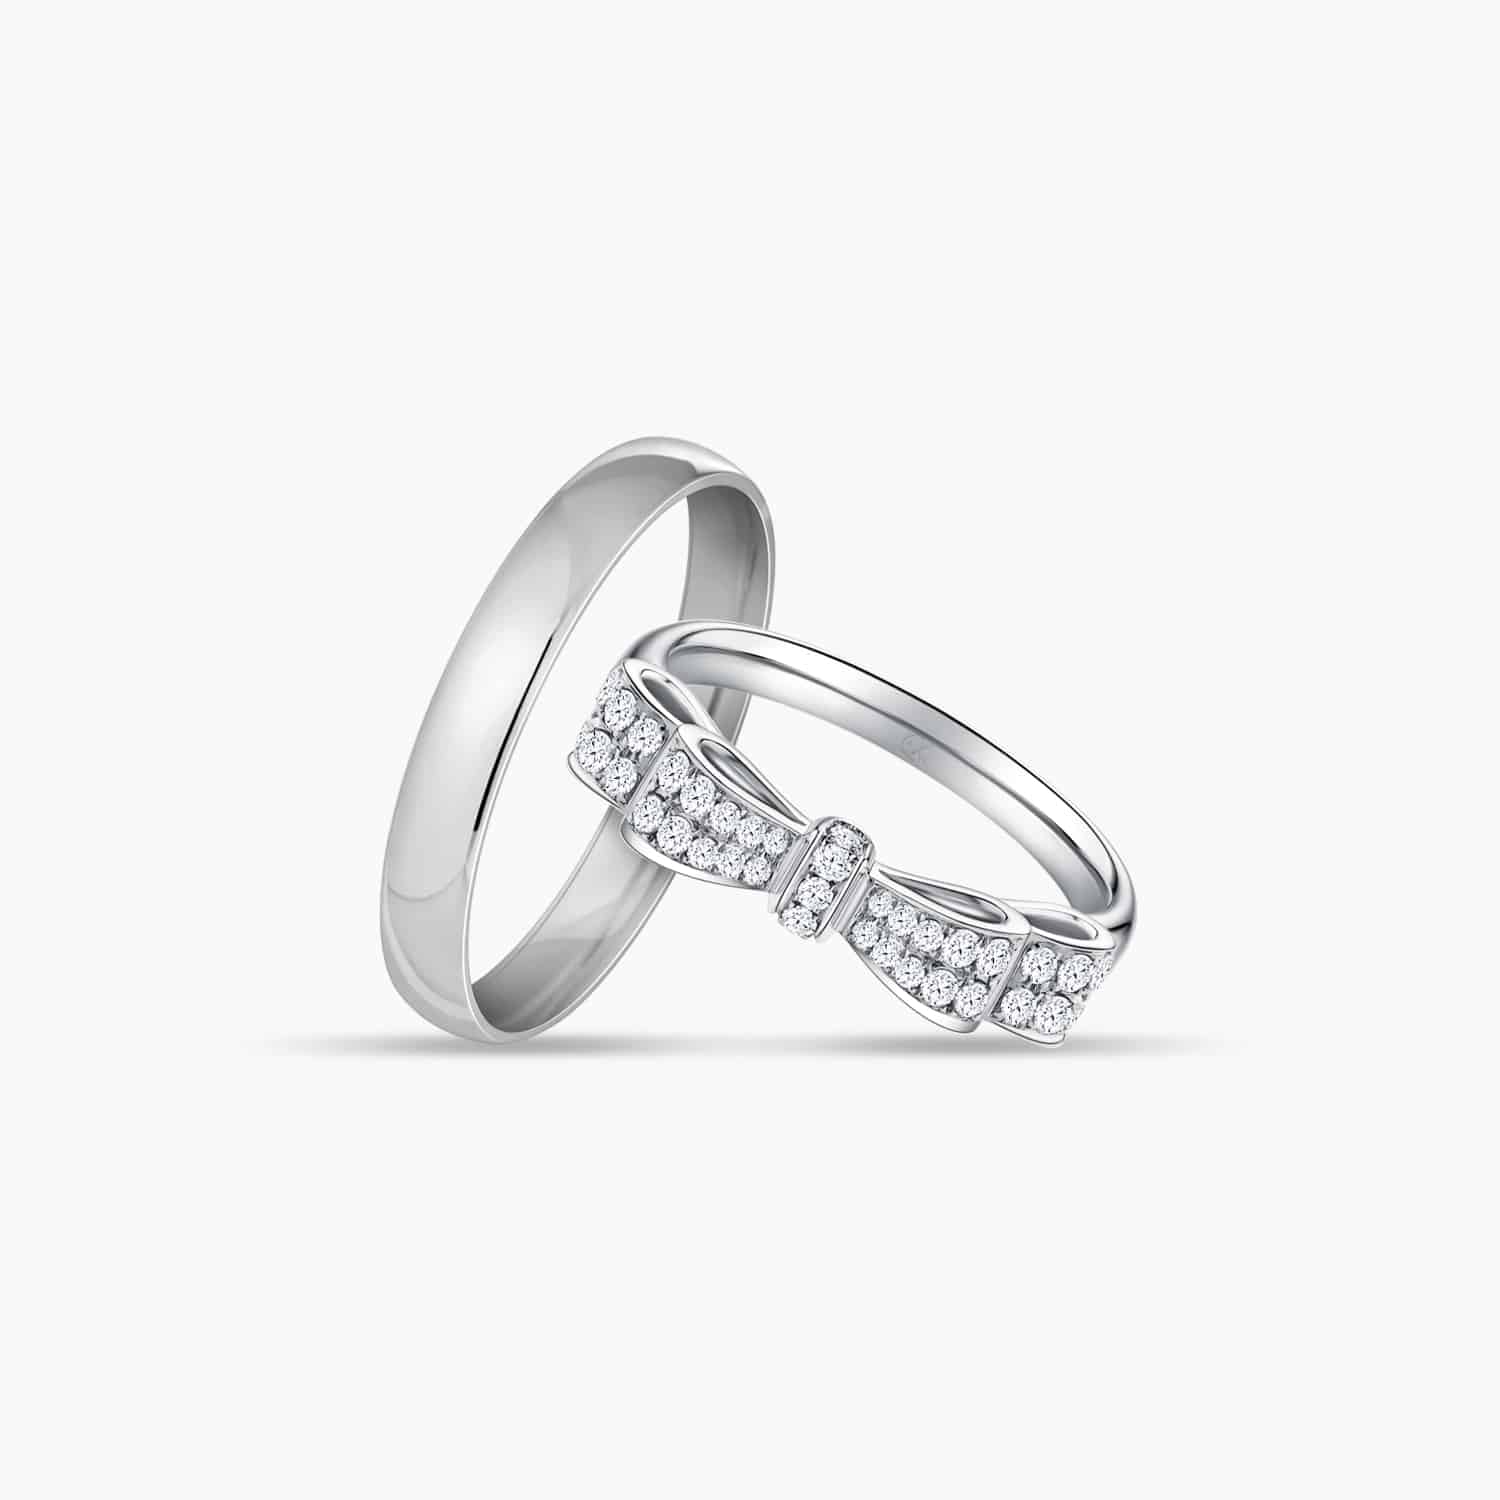 LVC Noeud Bow Wedding Band & Wedding Ring Set in White Gold Encrusted with Diamonds